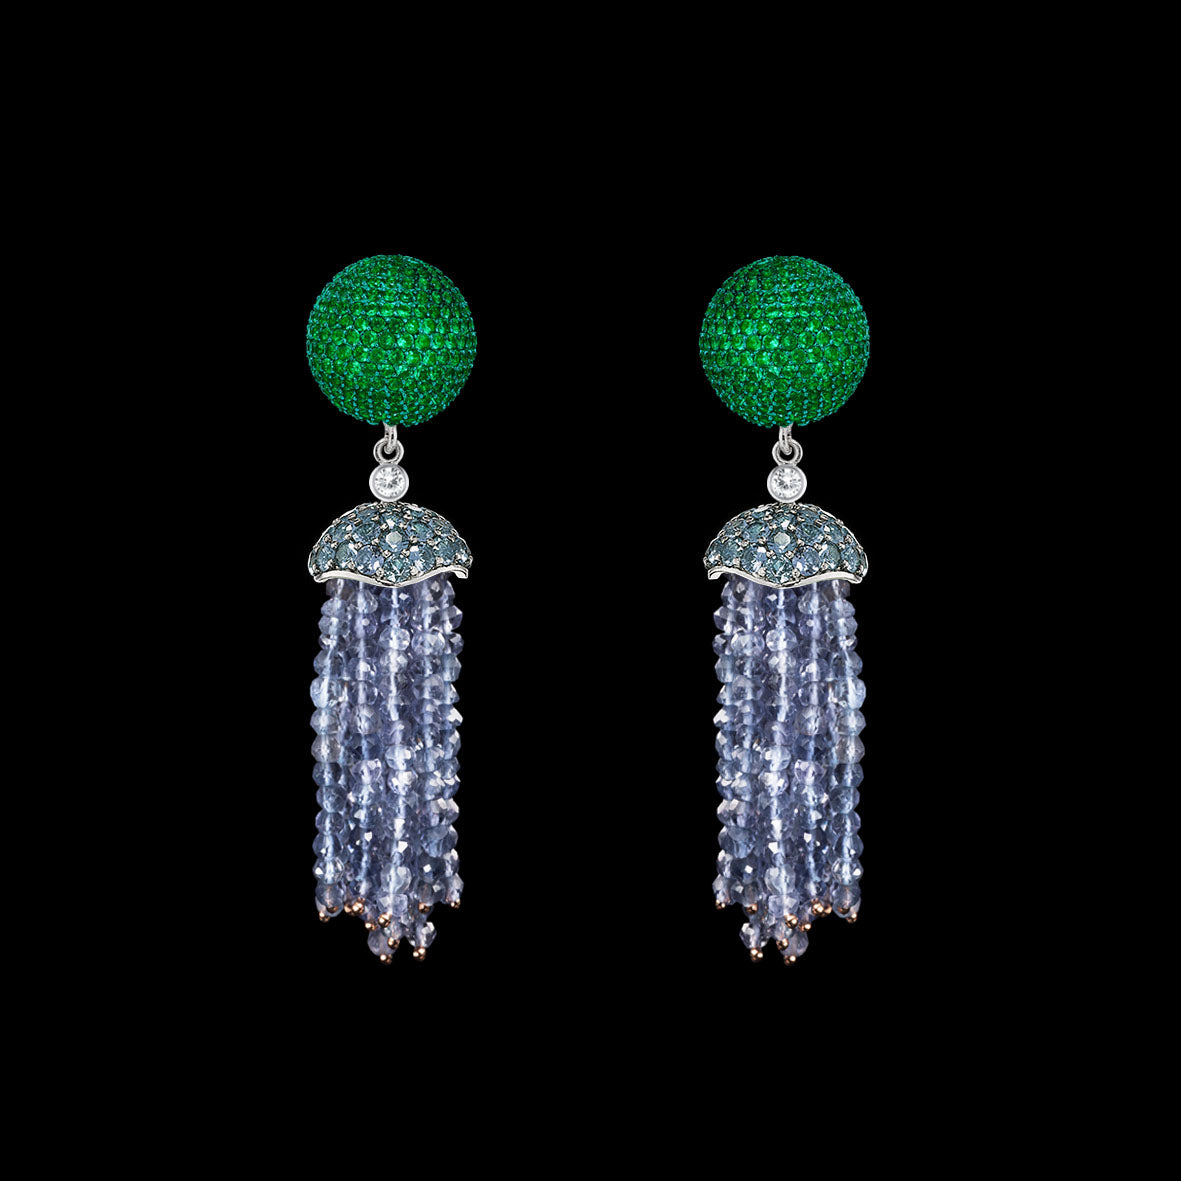 Emerald Bauble Tassel Earrings, Earring, Anabela Chan Joaillerie - Fine jewelry with laboratory grown and created gemstones hand-crafted in the United Kingdom. Anabela Chan Joaillerie is the first fine jewellery brand in the world to champion laboratory-grown and created gemstones with high jewellery design, artisanal craftsmanship and a focus on ethical and sustainable innovations.